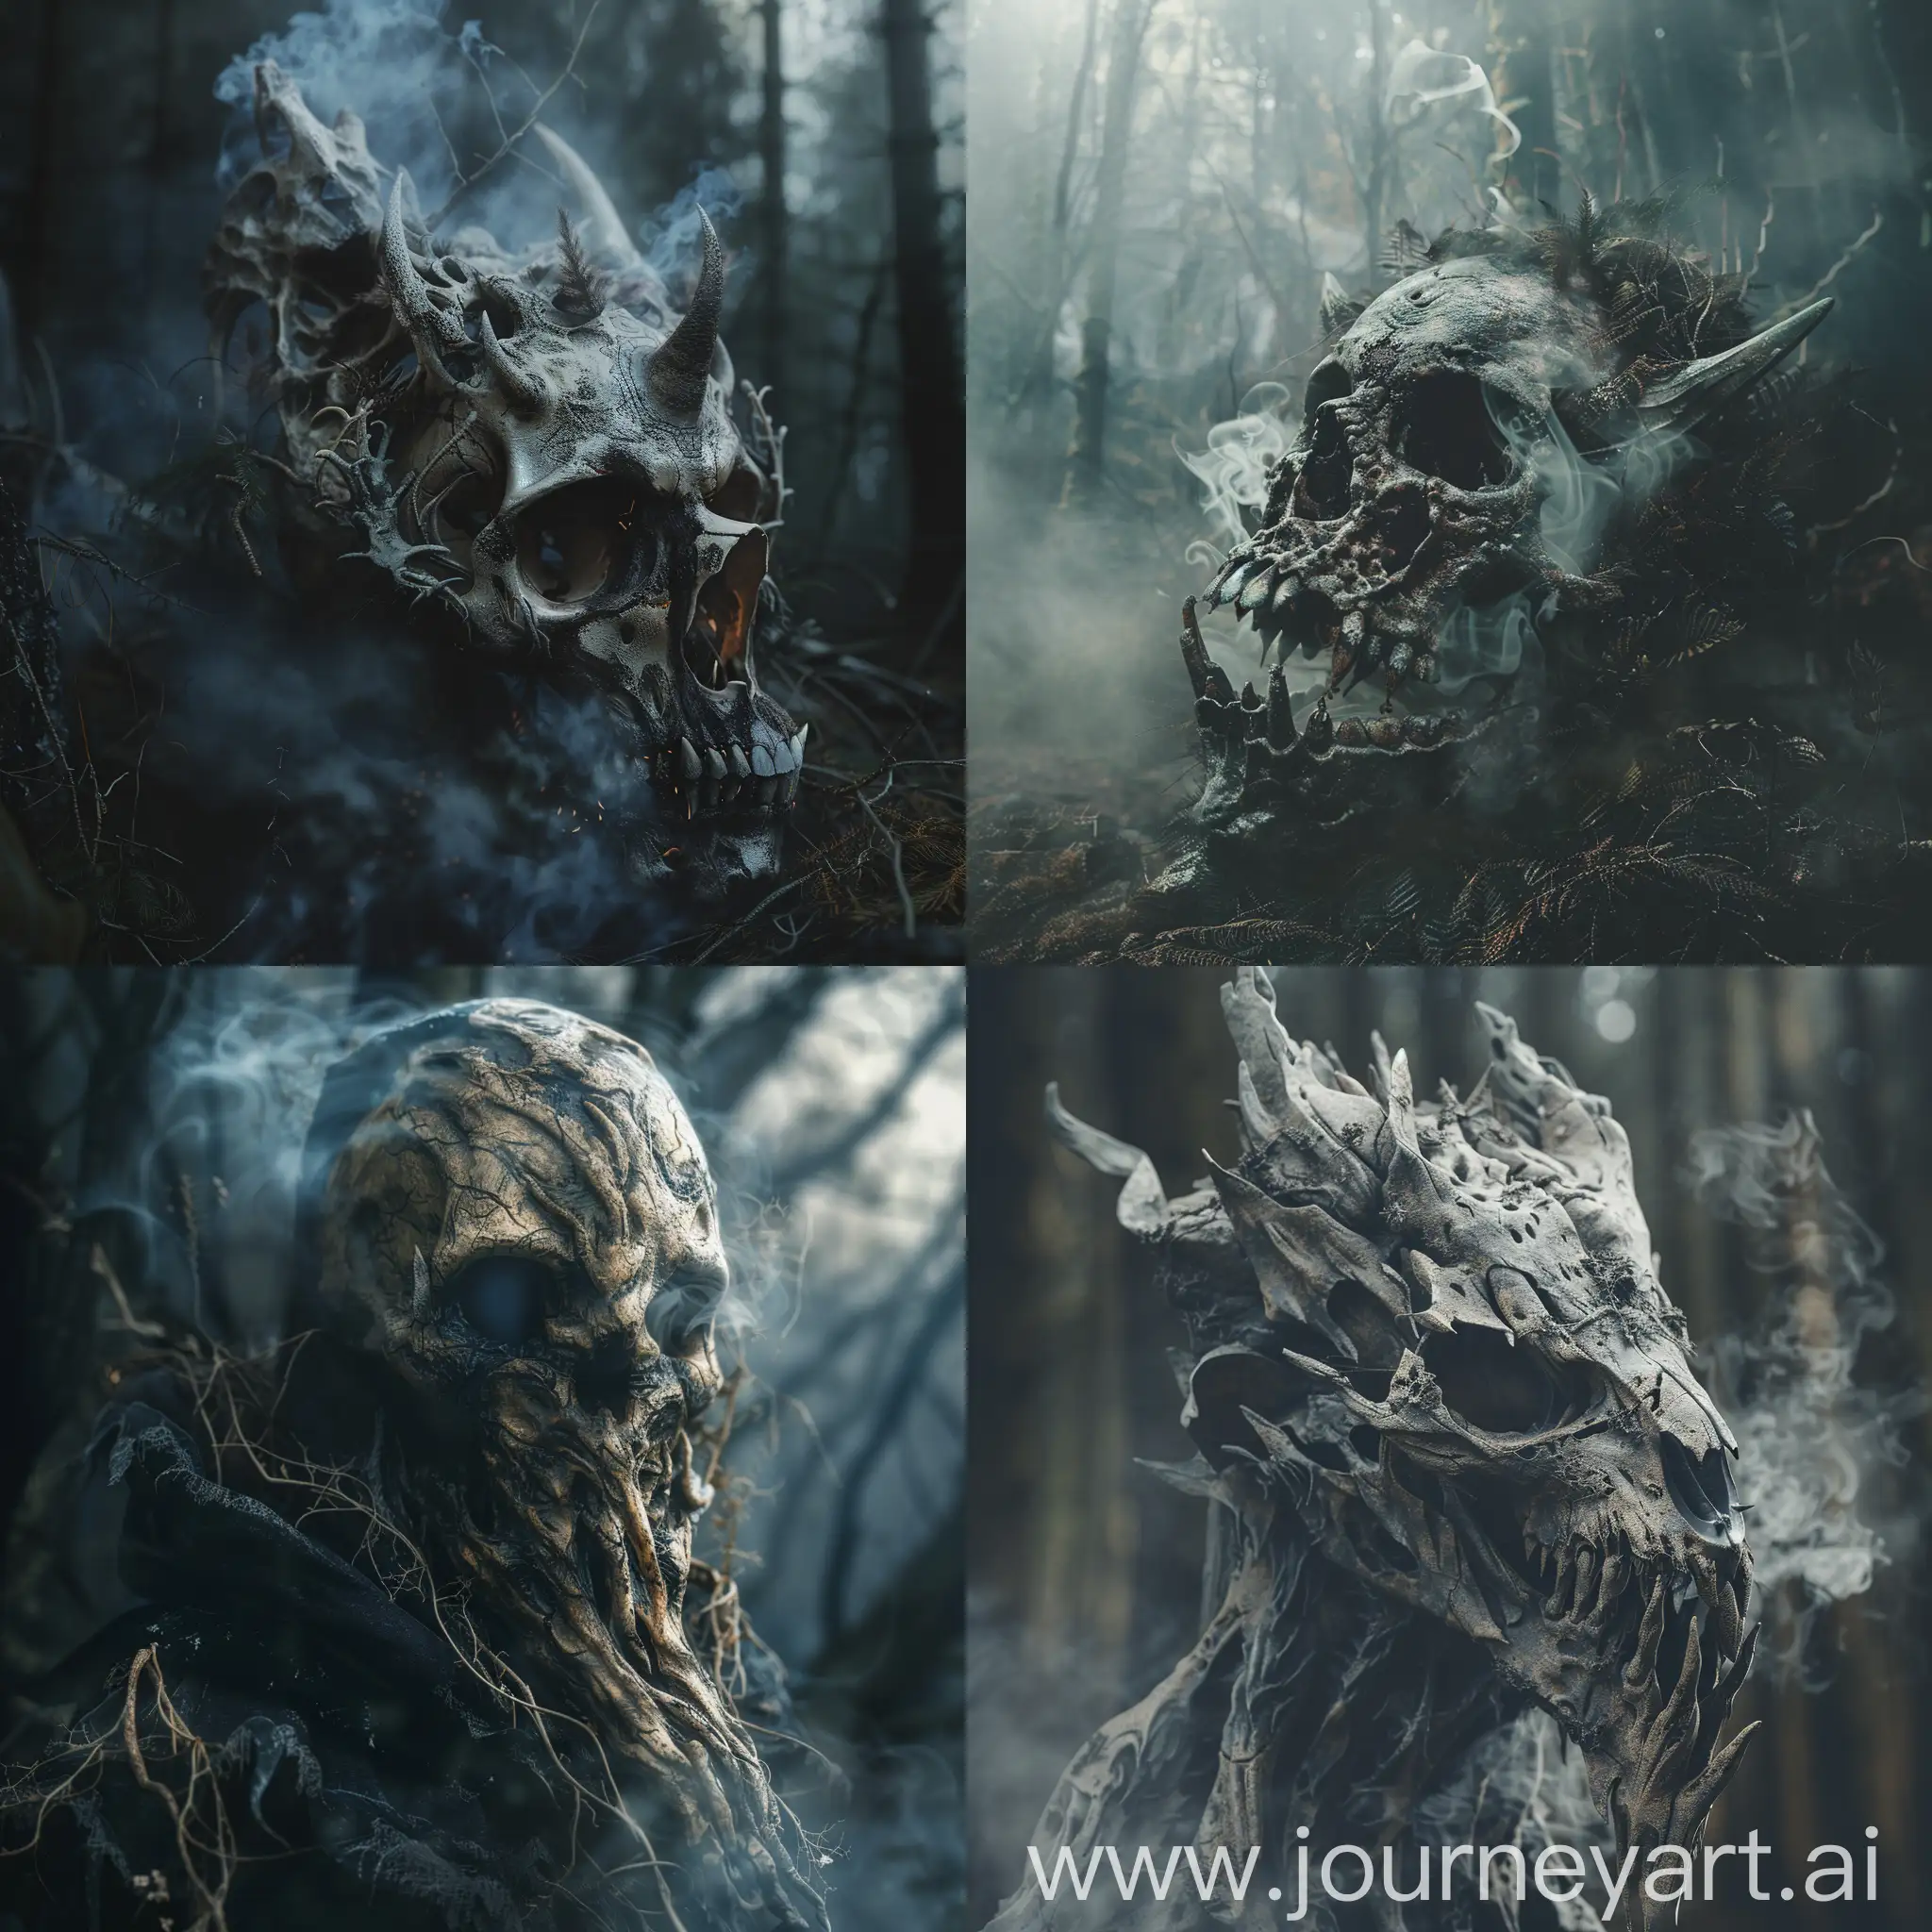 portrait of a mythical creature, death, skull, 50%20human 50%20death, dark forest, smoke, high quality, excellent detail, dramatic lighting, 8KHD